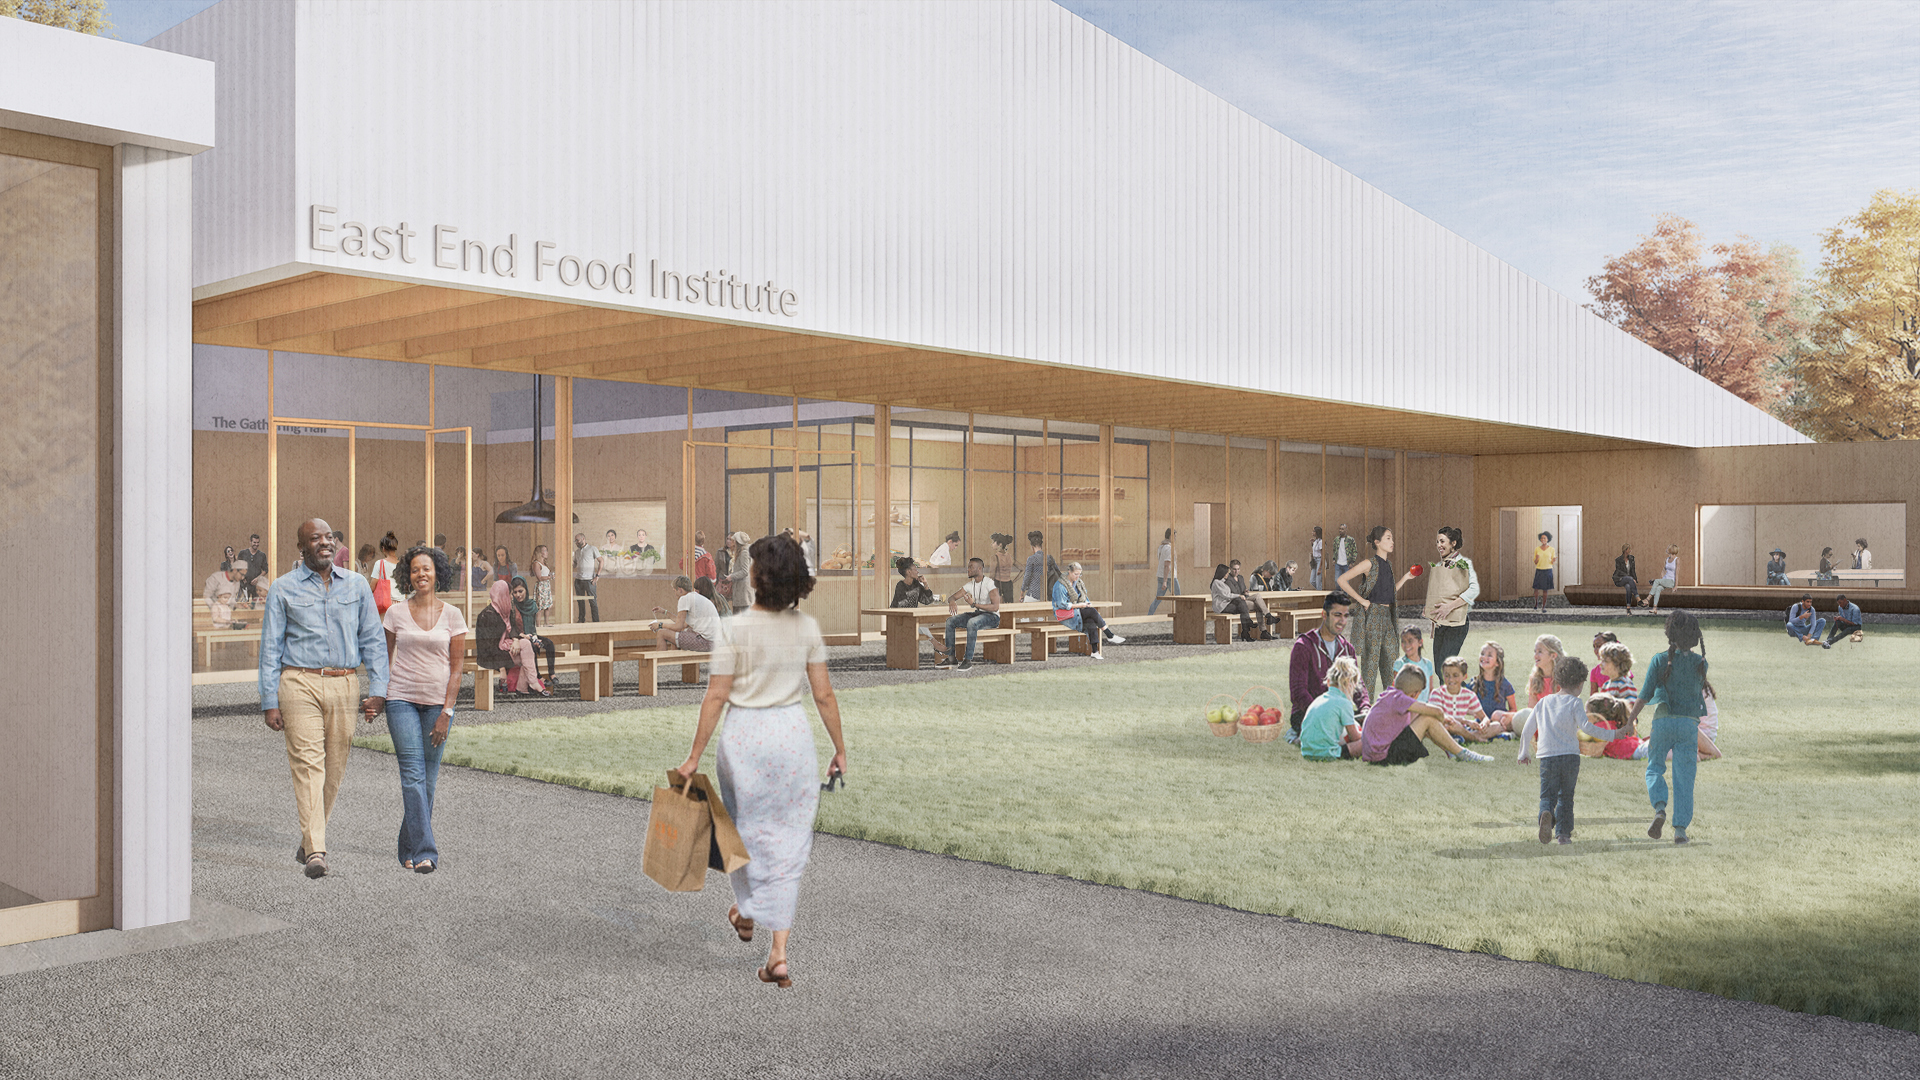 Renderings of plans for the proposed multi-million dollar East End Food Hub, which will be built in the location of the former Homeside Florist property in Riverhead. COURTESY EAST END FOOD INSTITUTE